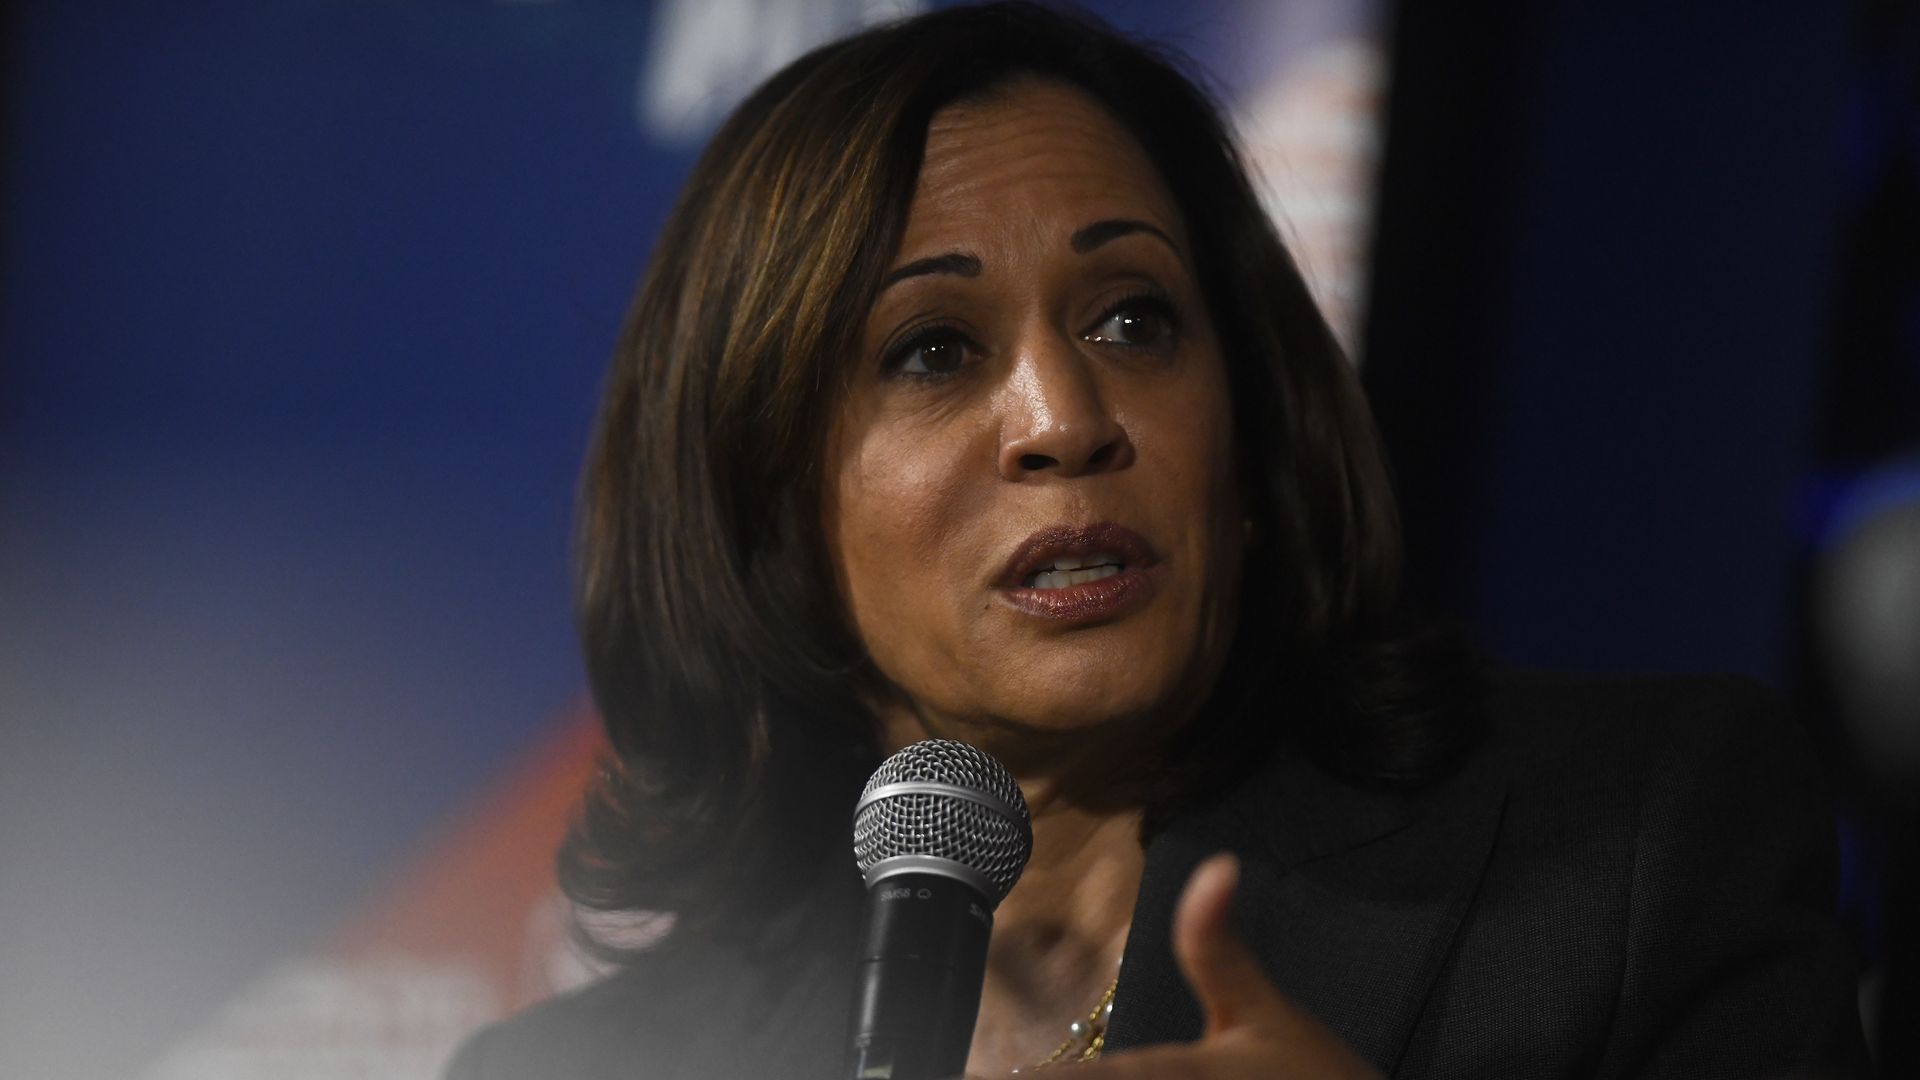 In this image, Kamala Harris speaks into a microphone while wearing a blazer.